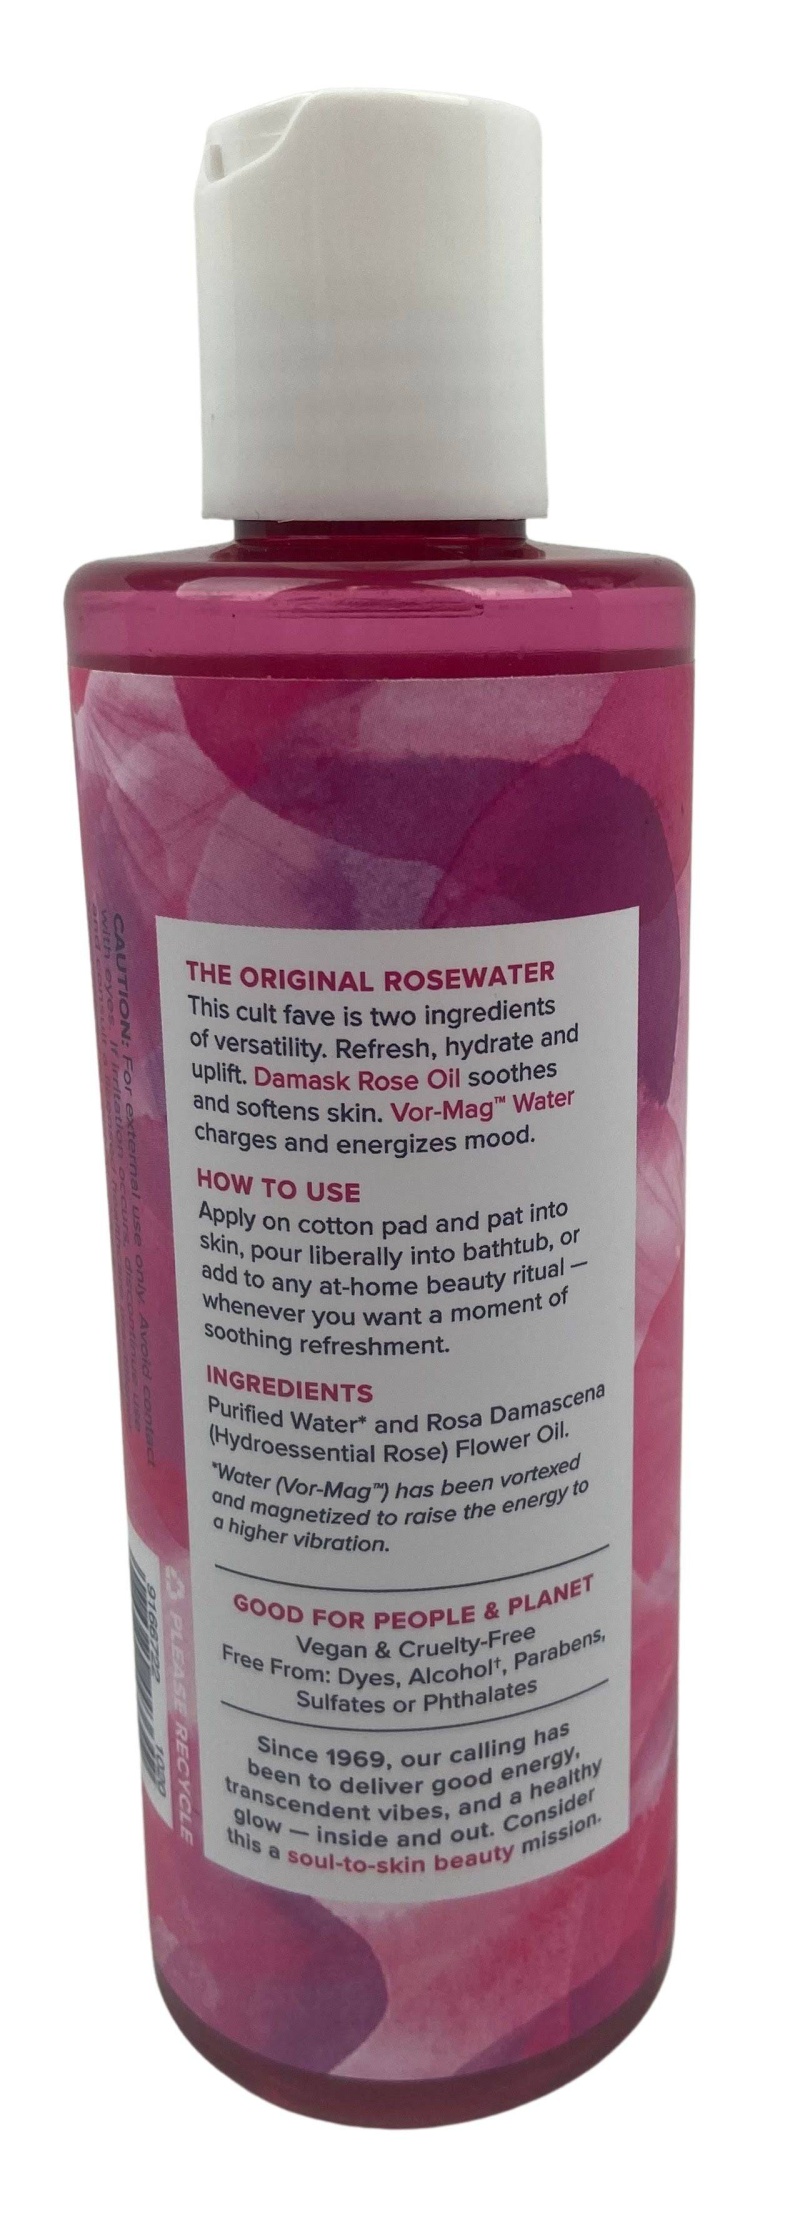 Heritage Store Rosewater